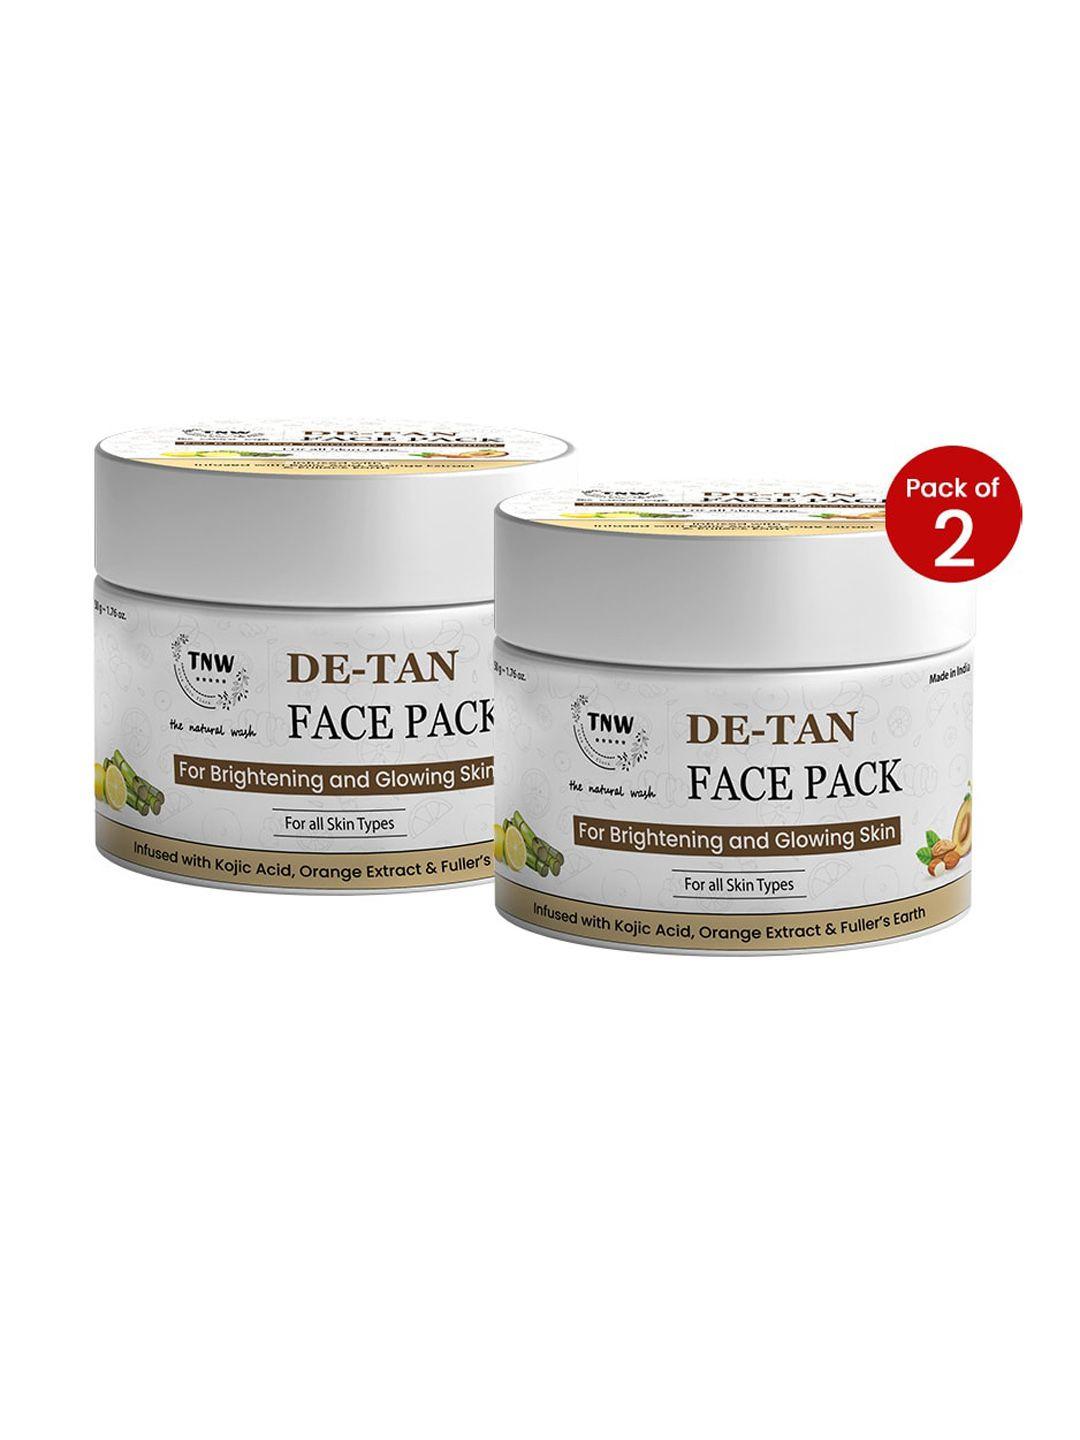 tnw the natural wash set of 2 de-tan face pack with kojic acid & orange extract - 50g each